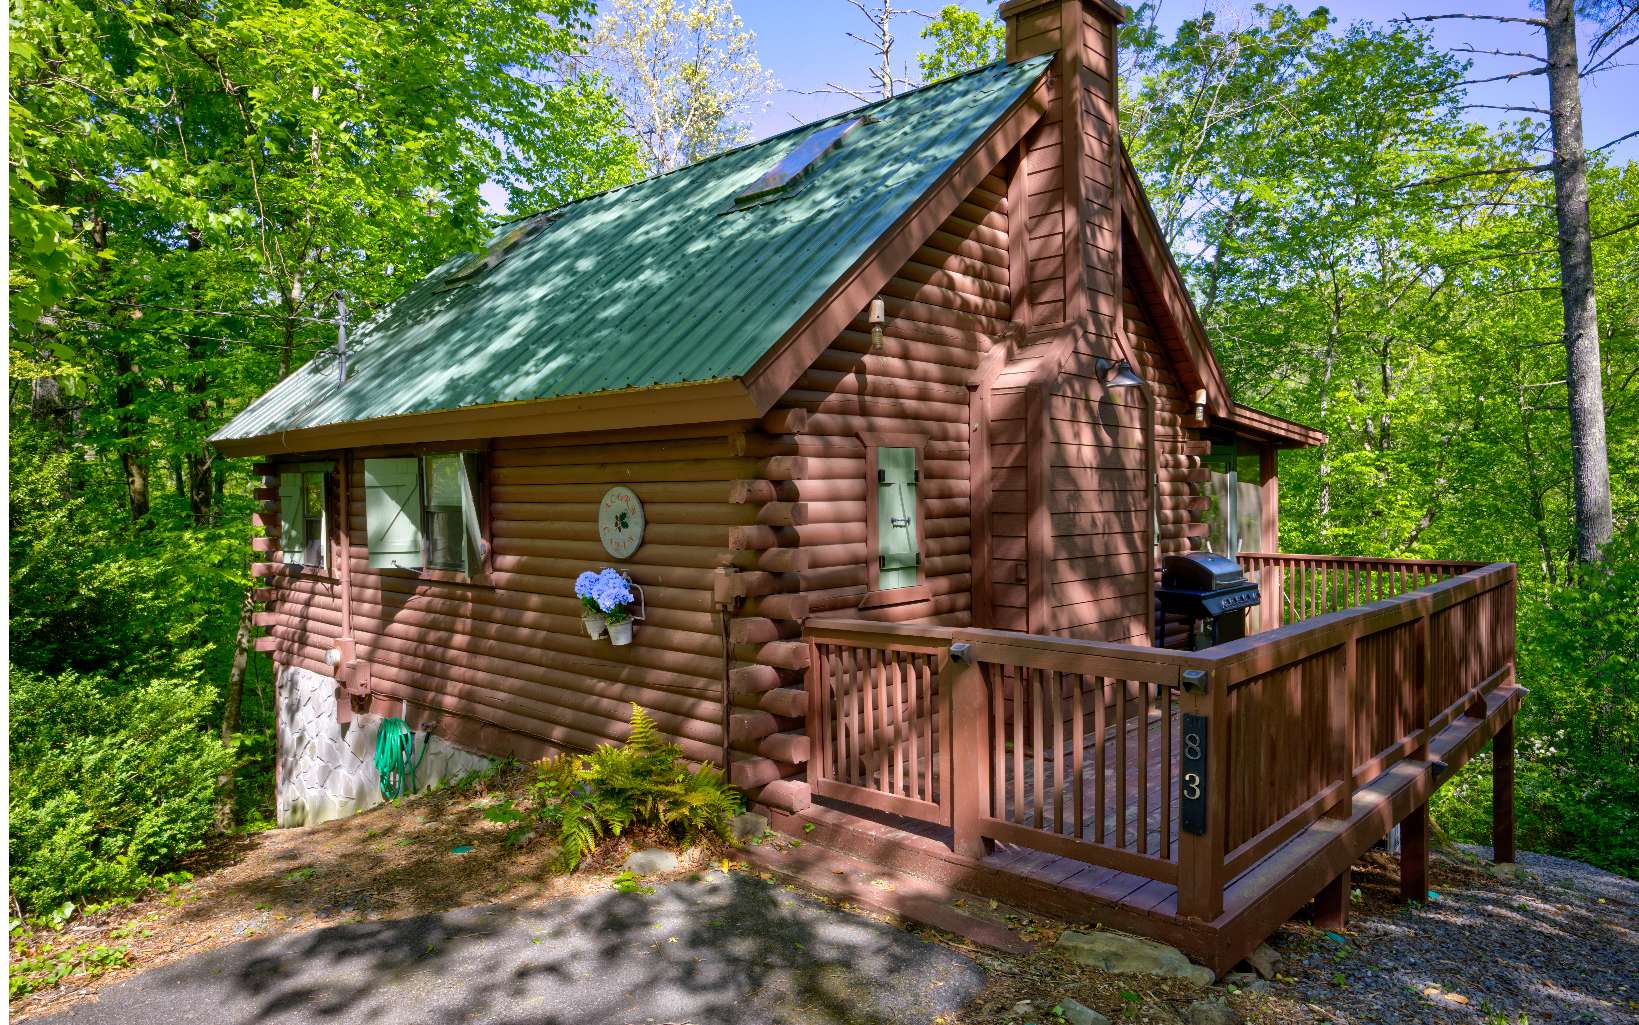 Embark on your next adventure in the Blue Ridge Mountains from the comfort of your cozy log cabin! All-paved access to your private wooded lot, just minutes to Downtown Blue Ridge, Lake Blue Ridge, Toccoa River, Rich Mountain Wildlife Preserve, & Aska Trails. Your family vacations will have everything and more with this charming storybook cabin- highlights include vaulted ceilings, bright skylight windows for additional natural light, hardwoods throughout, a stone fireplace, screened porch, ample crawl space for storing kayaks and paddleboards, a fire pit, and a hot tub! Meticulously maintained and sold fully furnished, this property will not last long! New HVAC system was installed in 2022. Whether enjoying your evening smores around the fire or sipping your morning coffee from the screened porch swing, this cabin combines the perfect blend of nature and relaxation. Located in the heart of the highly desired Cherry Log community, this is the mountain escape you’ve been searching for!